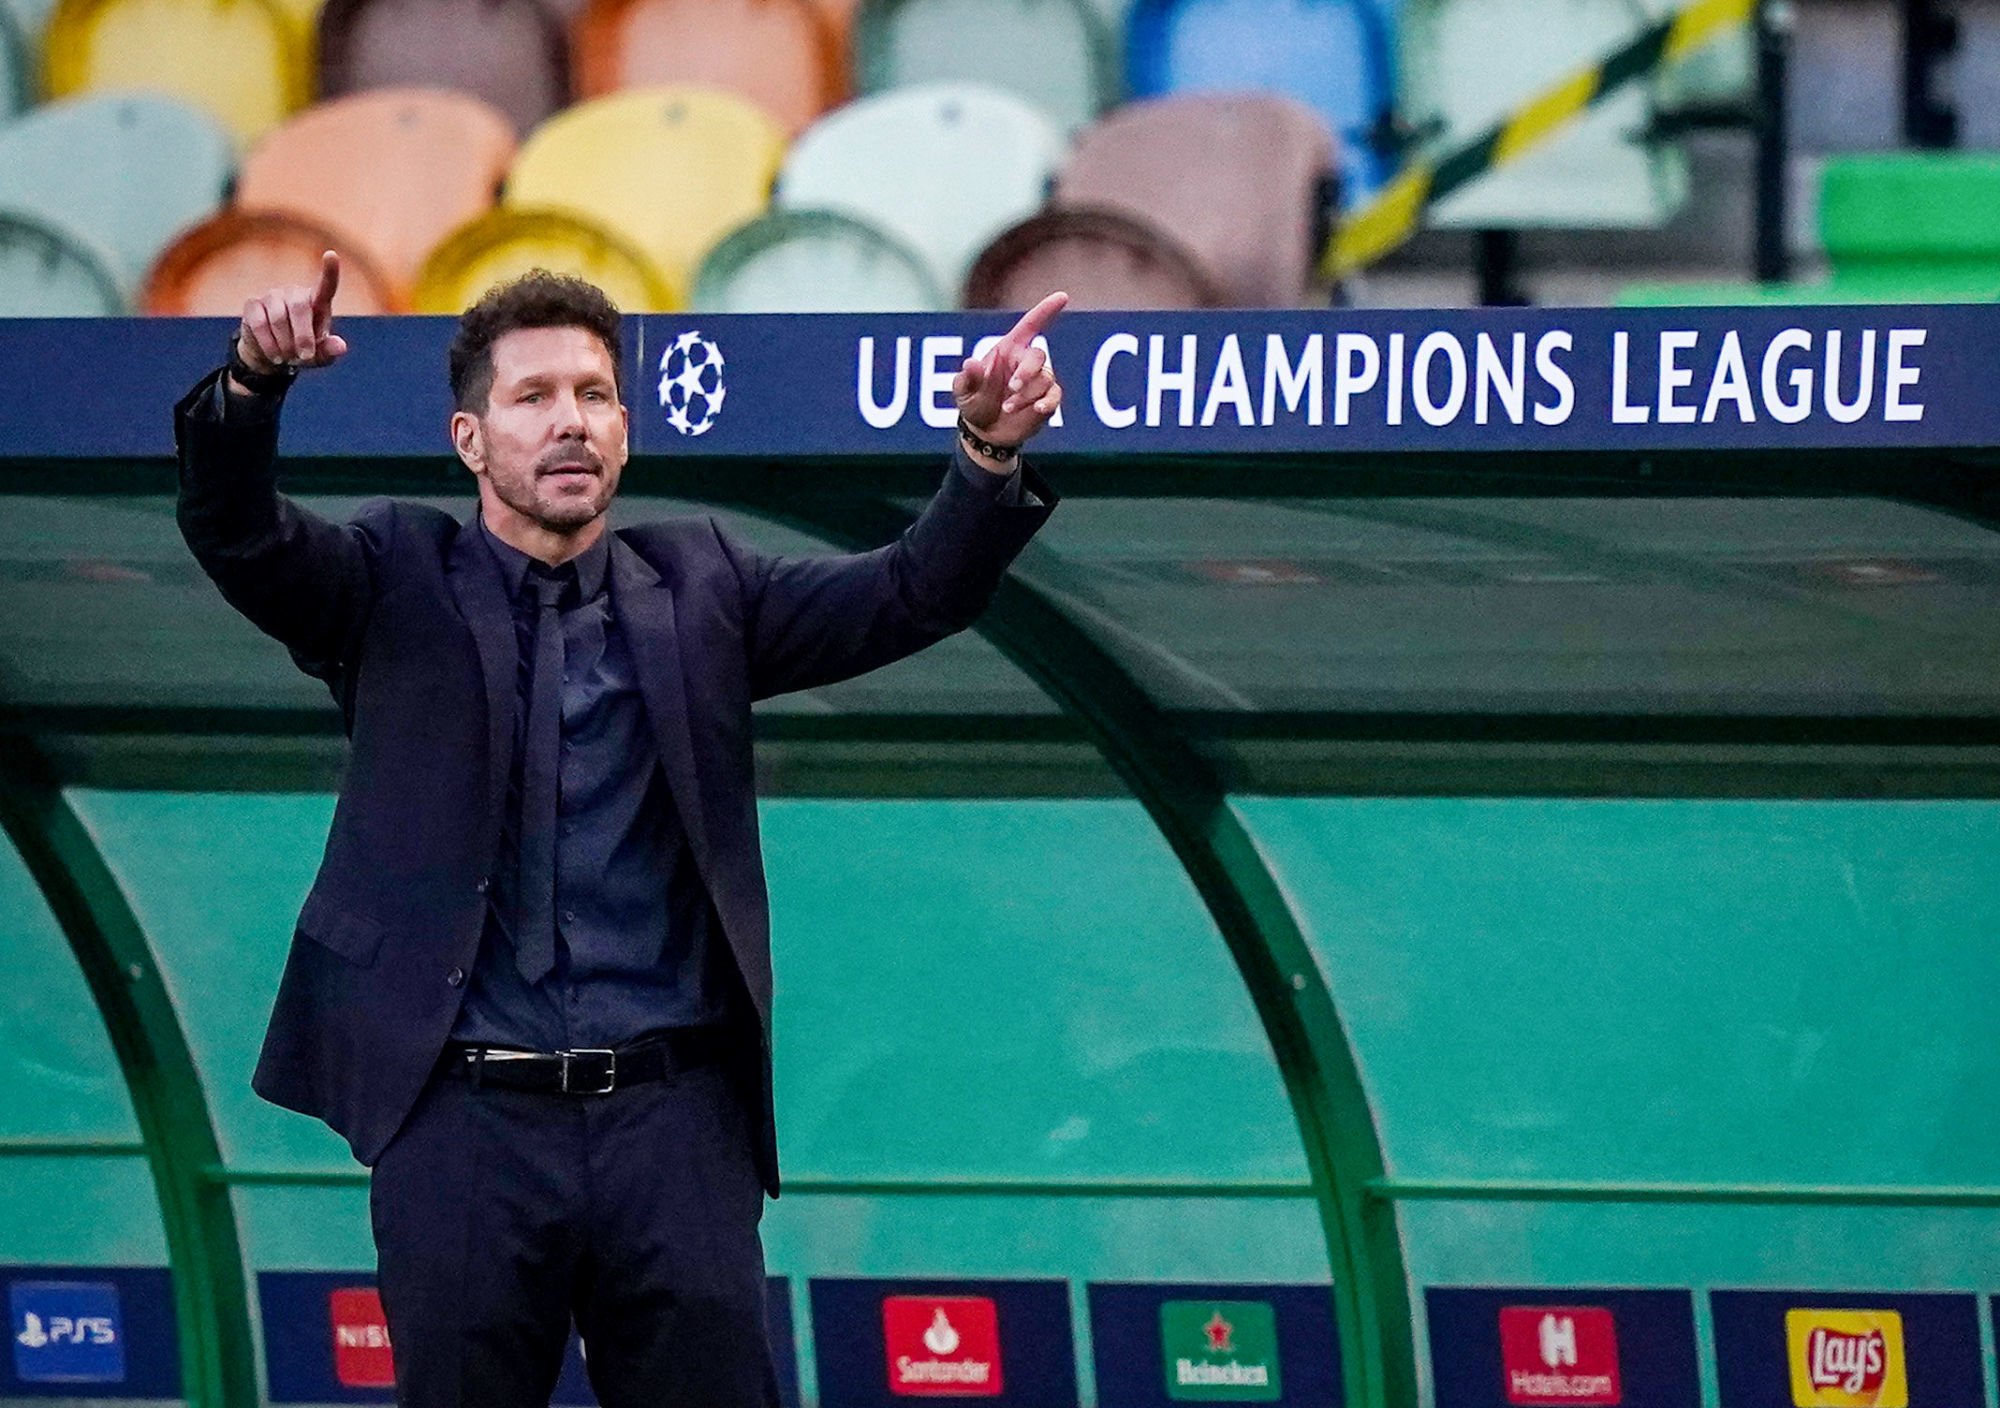 firo Champions League 1/4 final 08/13/2020 RB Leipzig - Atletico Madrid Lisbon, Portugal, August 13th 2020, coach Diego Simeone (Atletico) in the quarterfinal UEFA Champions League match final tournament RB LEIPZIG - ATLETICO MADRID in season 2019/2020. - UEFA REGULATIONS PROHIBIT ANY USE OF PHOTOGRAPHS as IMAGE SEQUENCES and / or QUASI-VIDEO - National and international News-Agencies OUT Editorial Use ONLY Peter Schatz / Pool / via / firosportphoto | usage worldwide 

Photo by Icon Sport - Diego SIMEONE - Estadio Jose Alvalade - Lisbonne (Portugal)